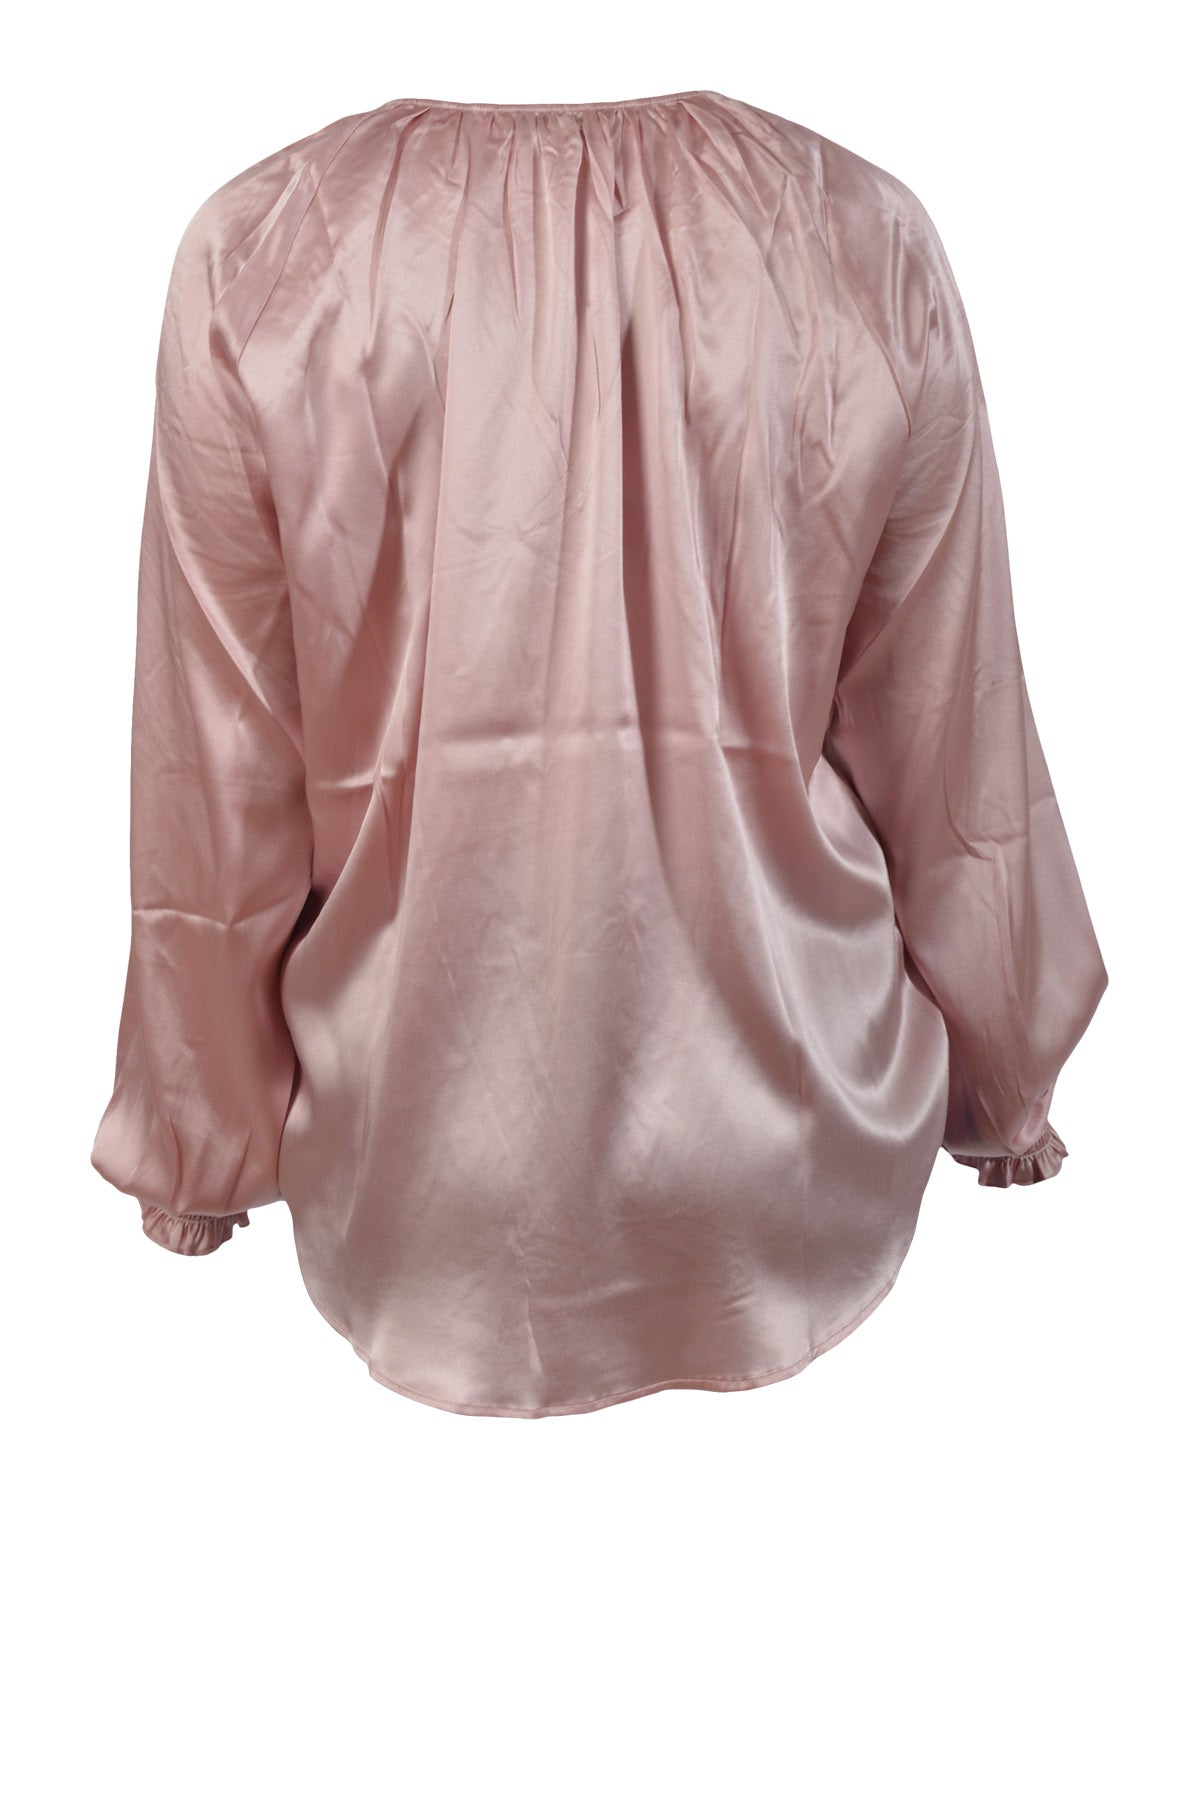 Charlotte Sparre Want me blouse 2801, Solid Rose